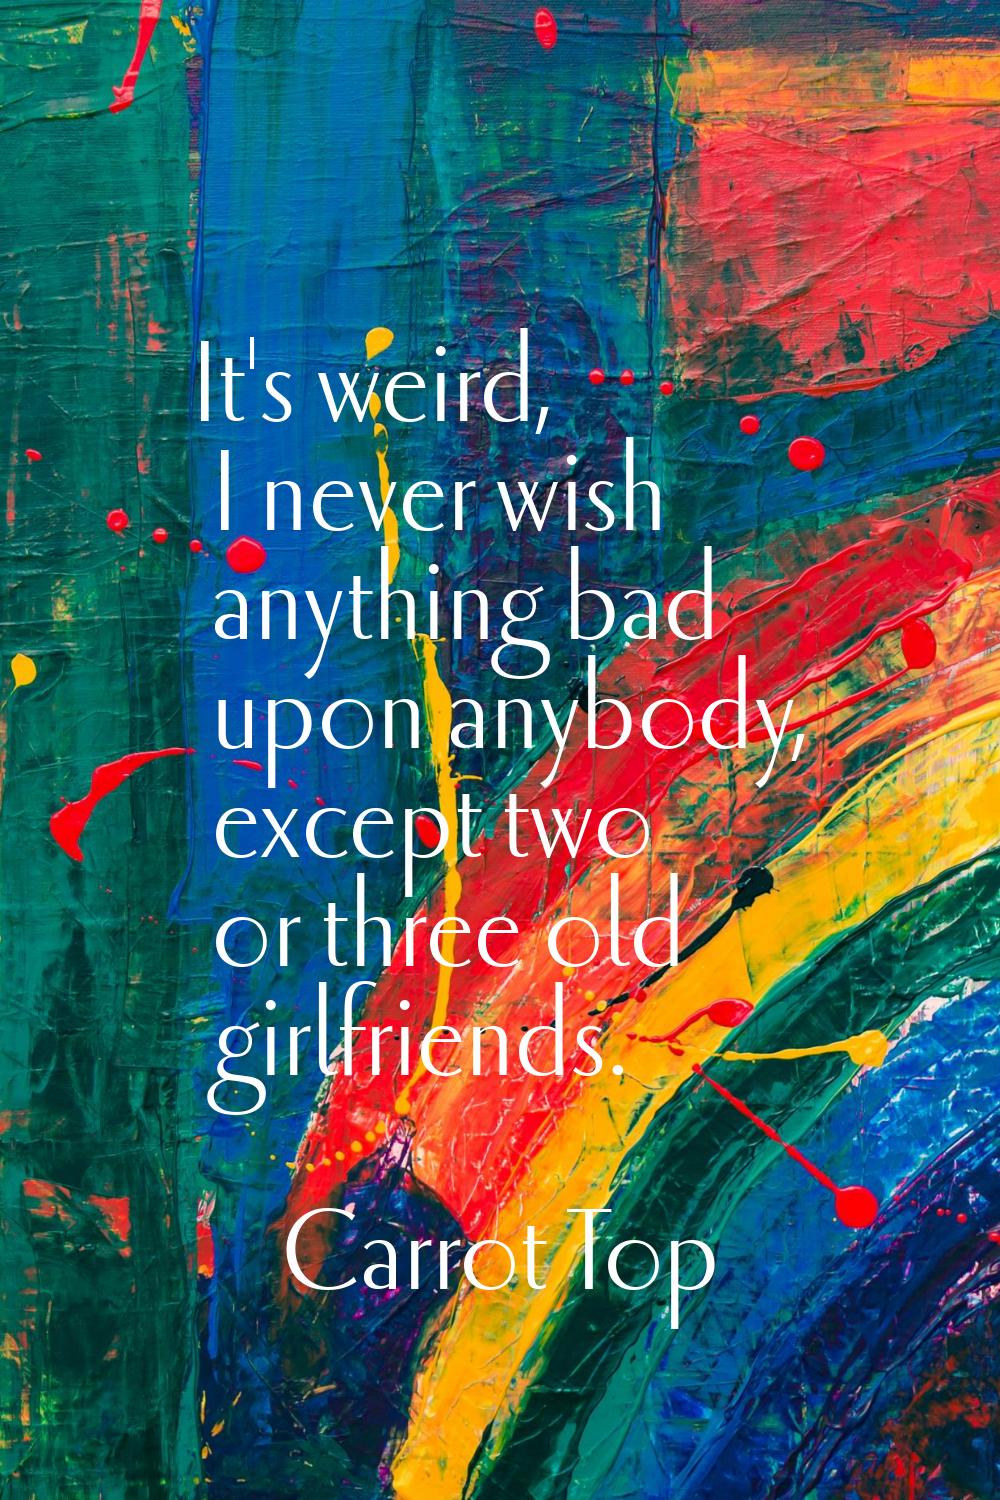 It's weird, I never wish anything bad upon anybody, except two or three old girlfriends.